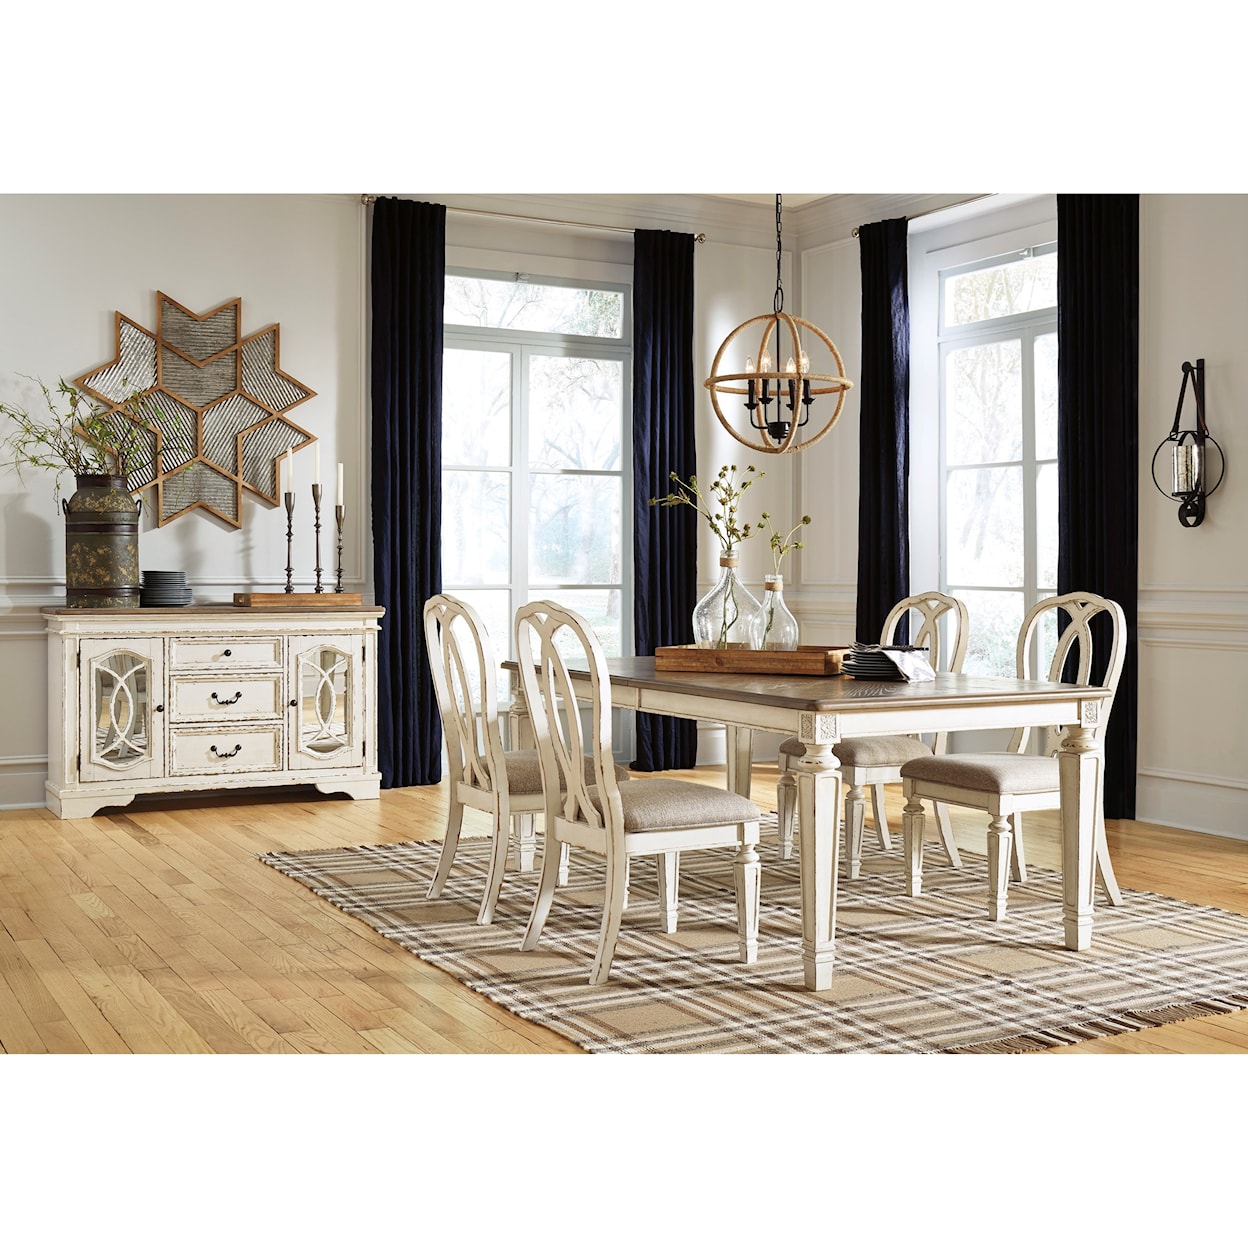 Signature Design by Ashley Furniture Realyn Casual Dining Room Group